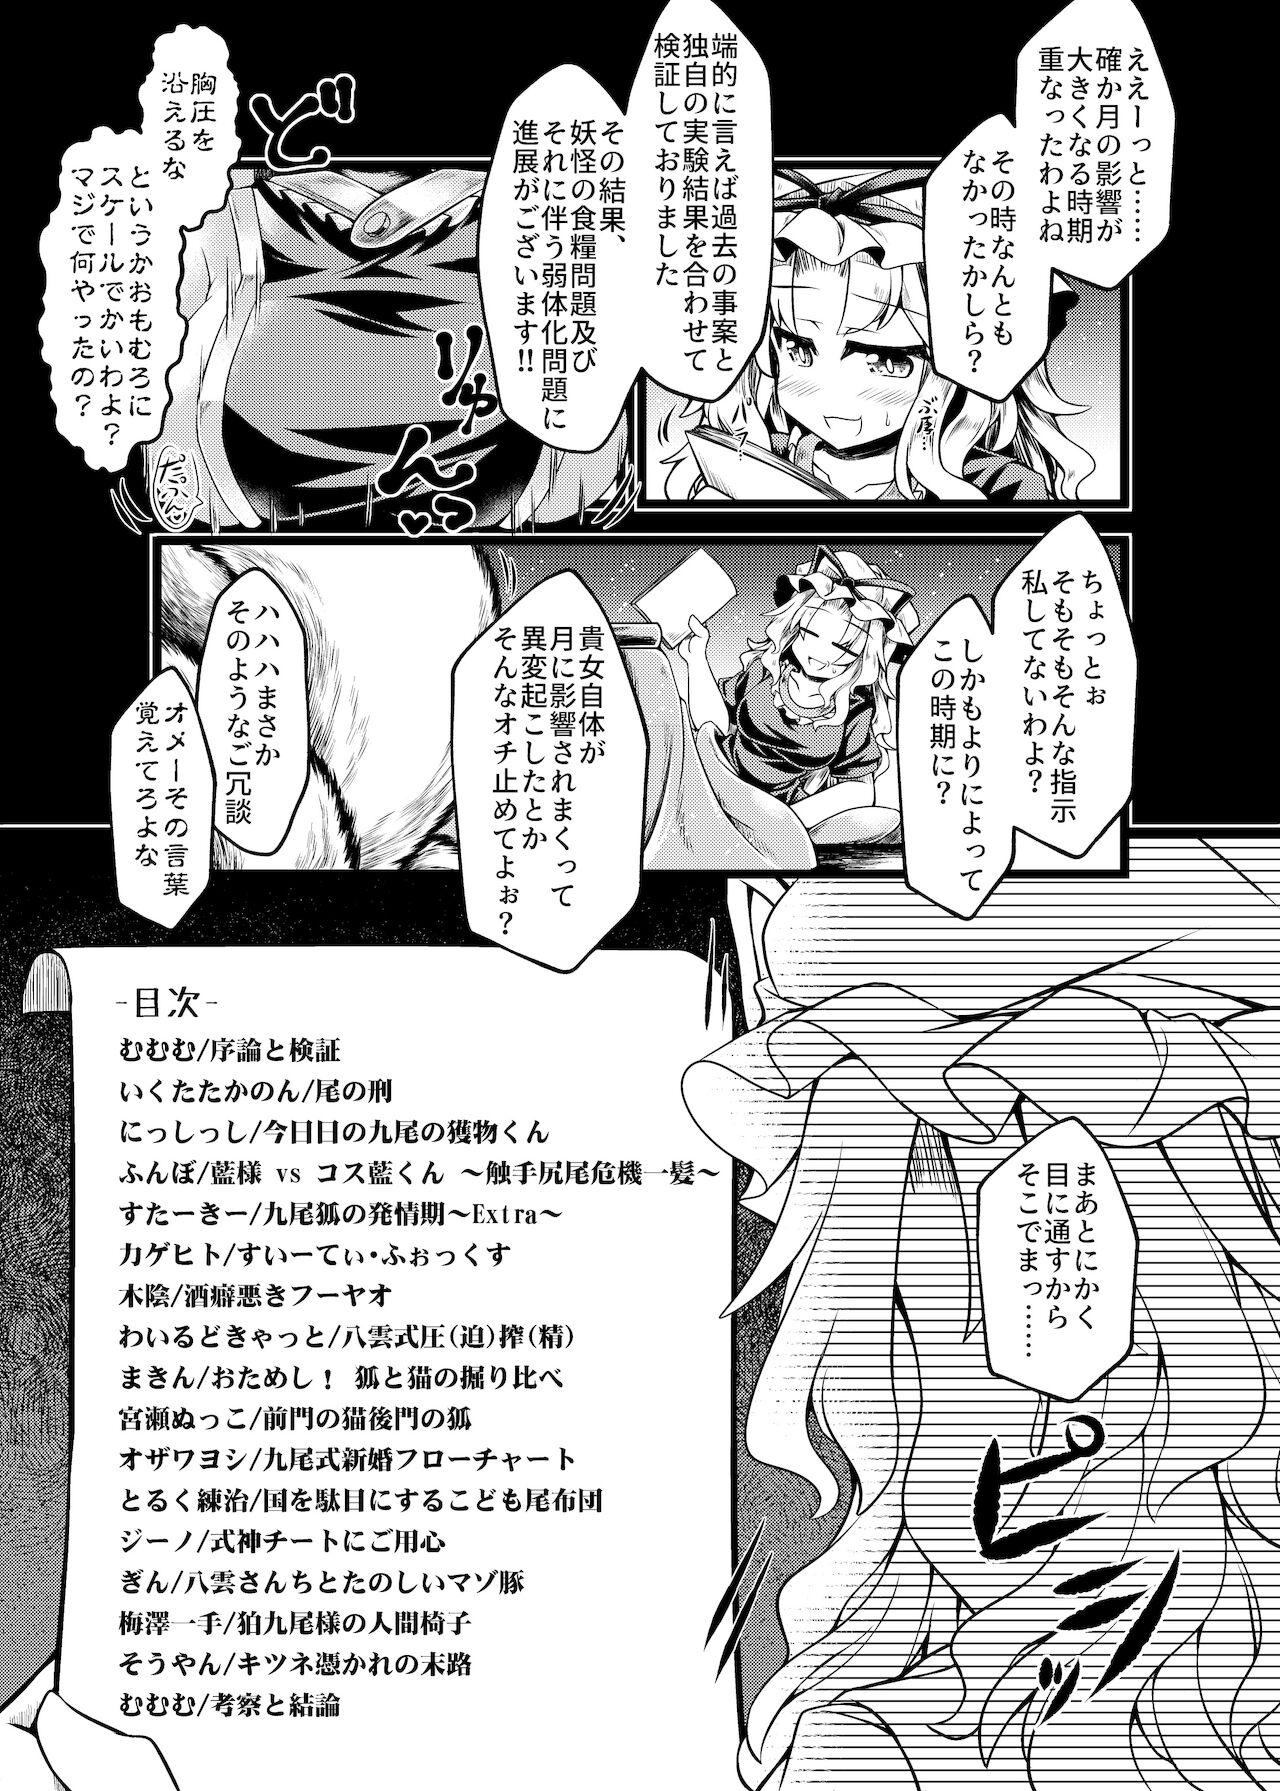 Perfect Tits 嫐九尾の搾精報告 - Touhou project Tgirl - Page 5